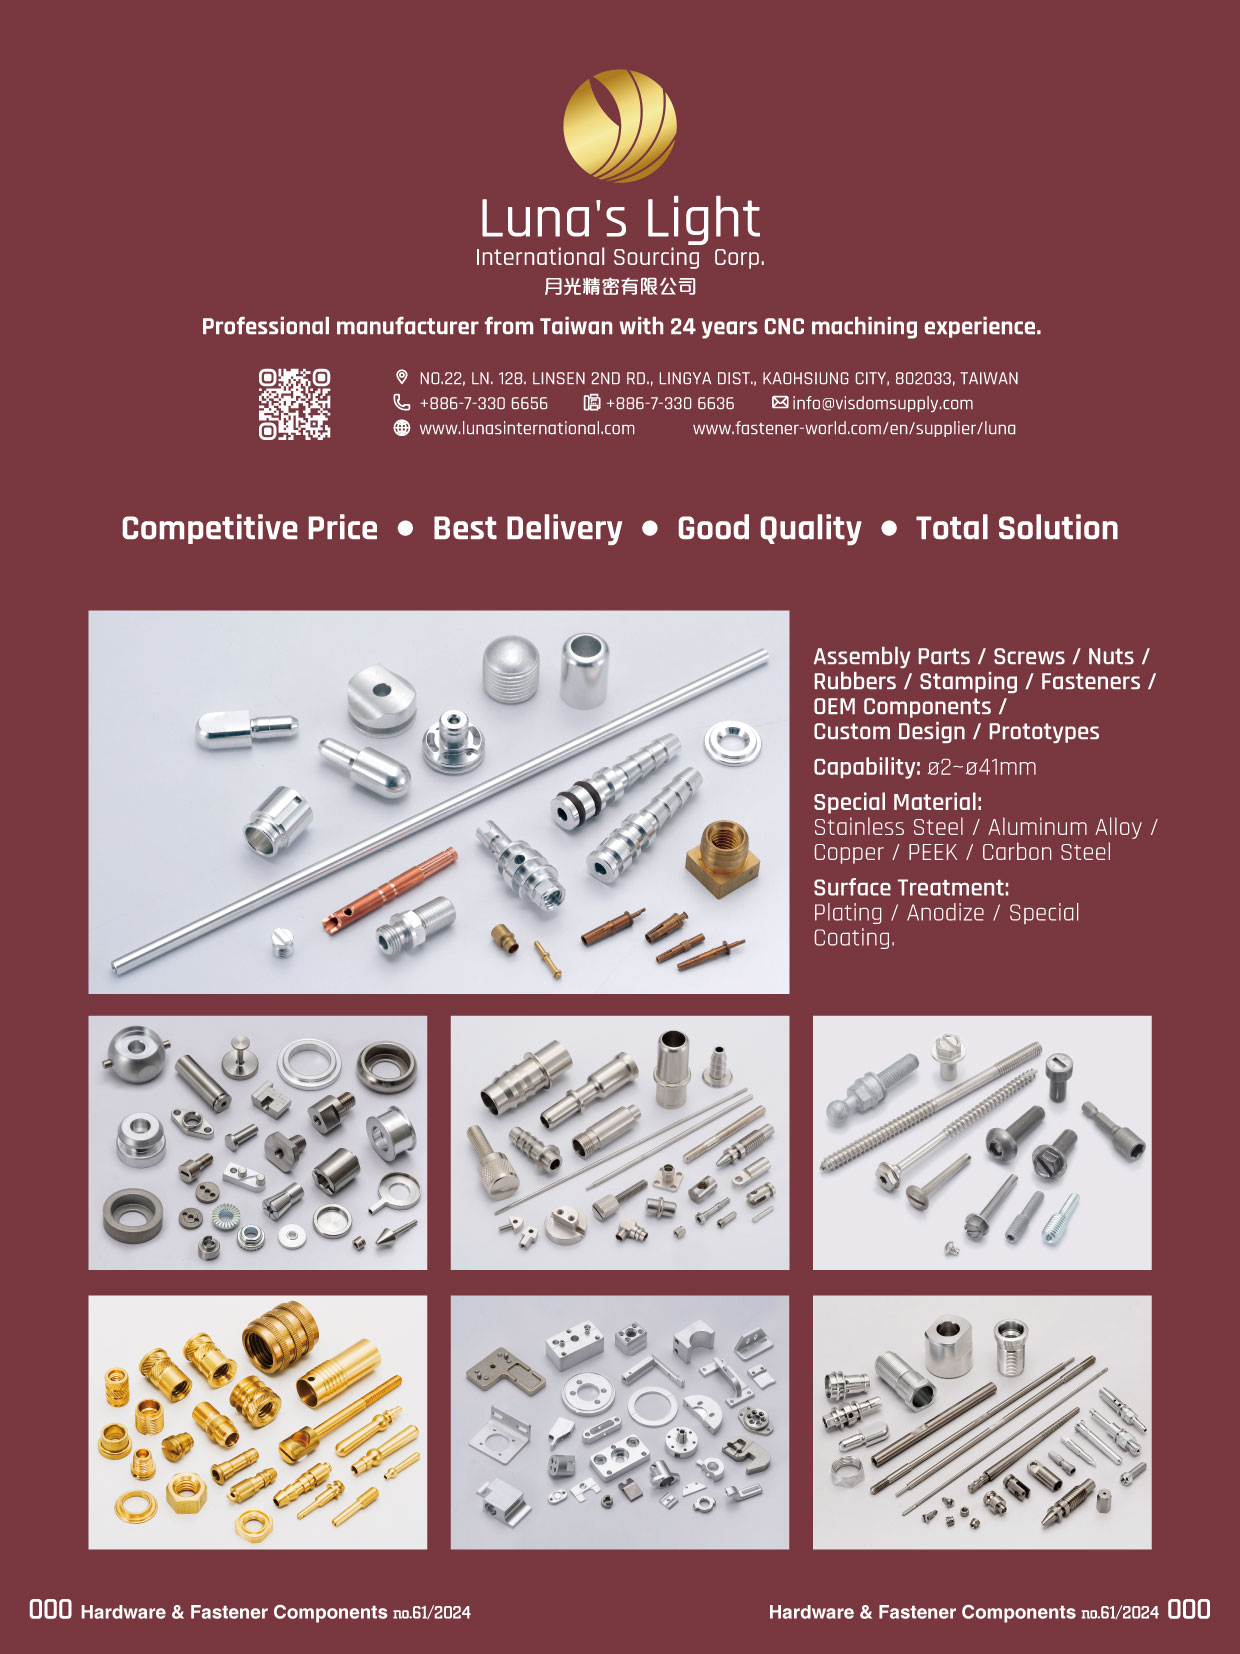 Luna's Light International Sourcing Corporation , CNC Machining Parts, Assembly Parts, Screws, Nuts, Rubbers, Stamping Fasteners, OEM Components, Custom Design, Prototypes